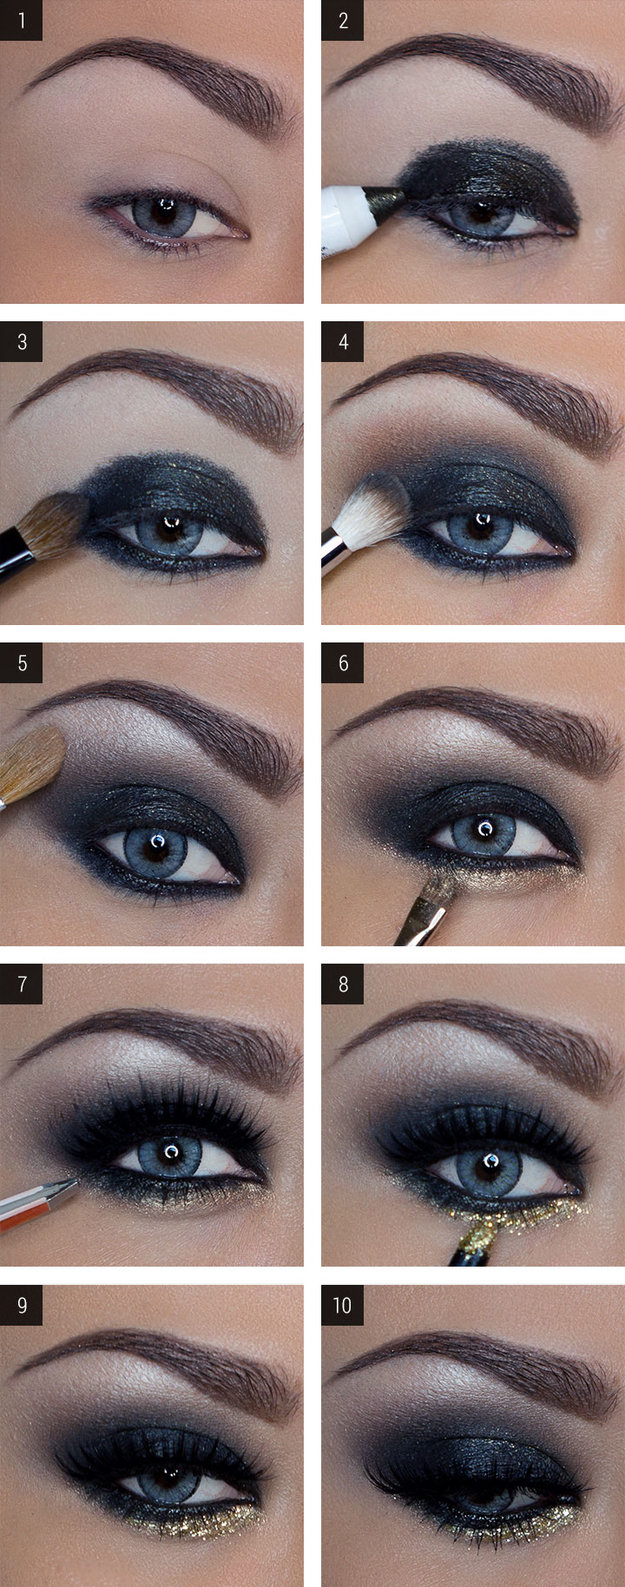 10 super easy step by step makeup tutorials for blue eyes